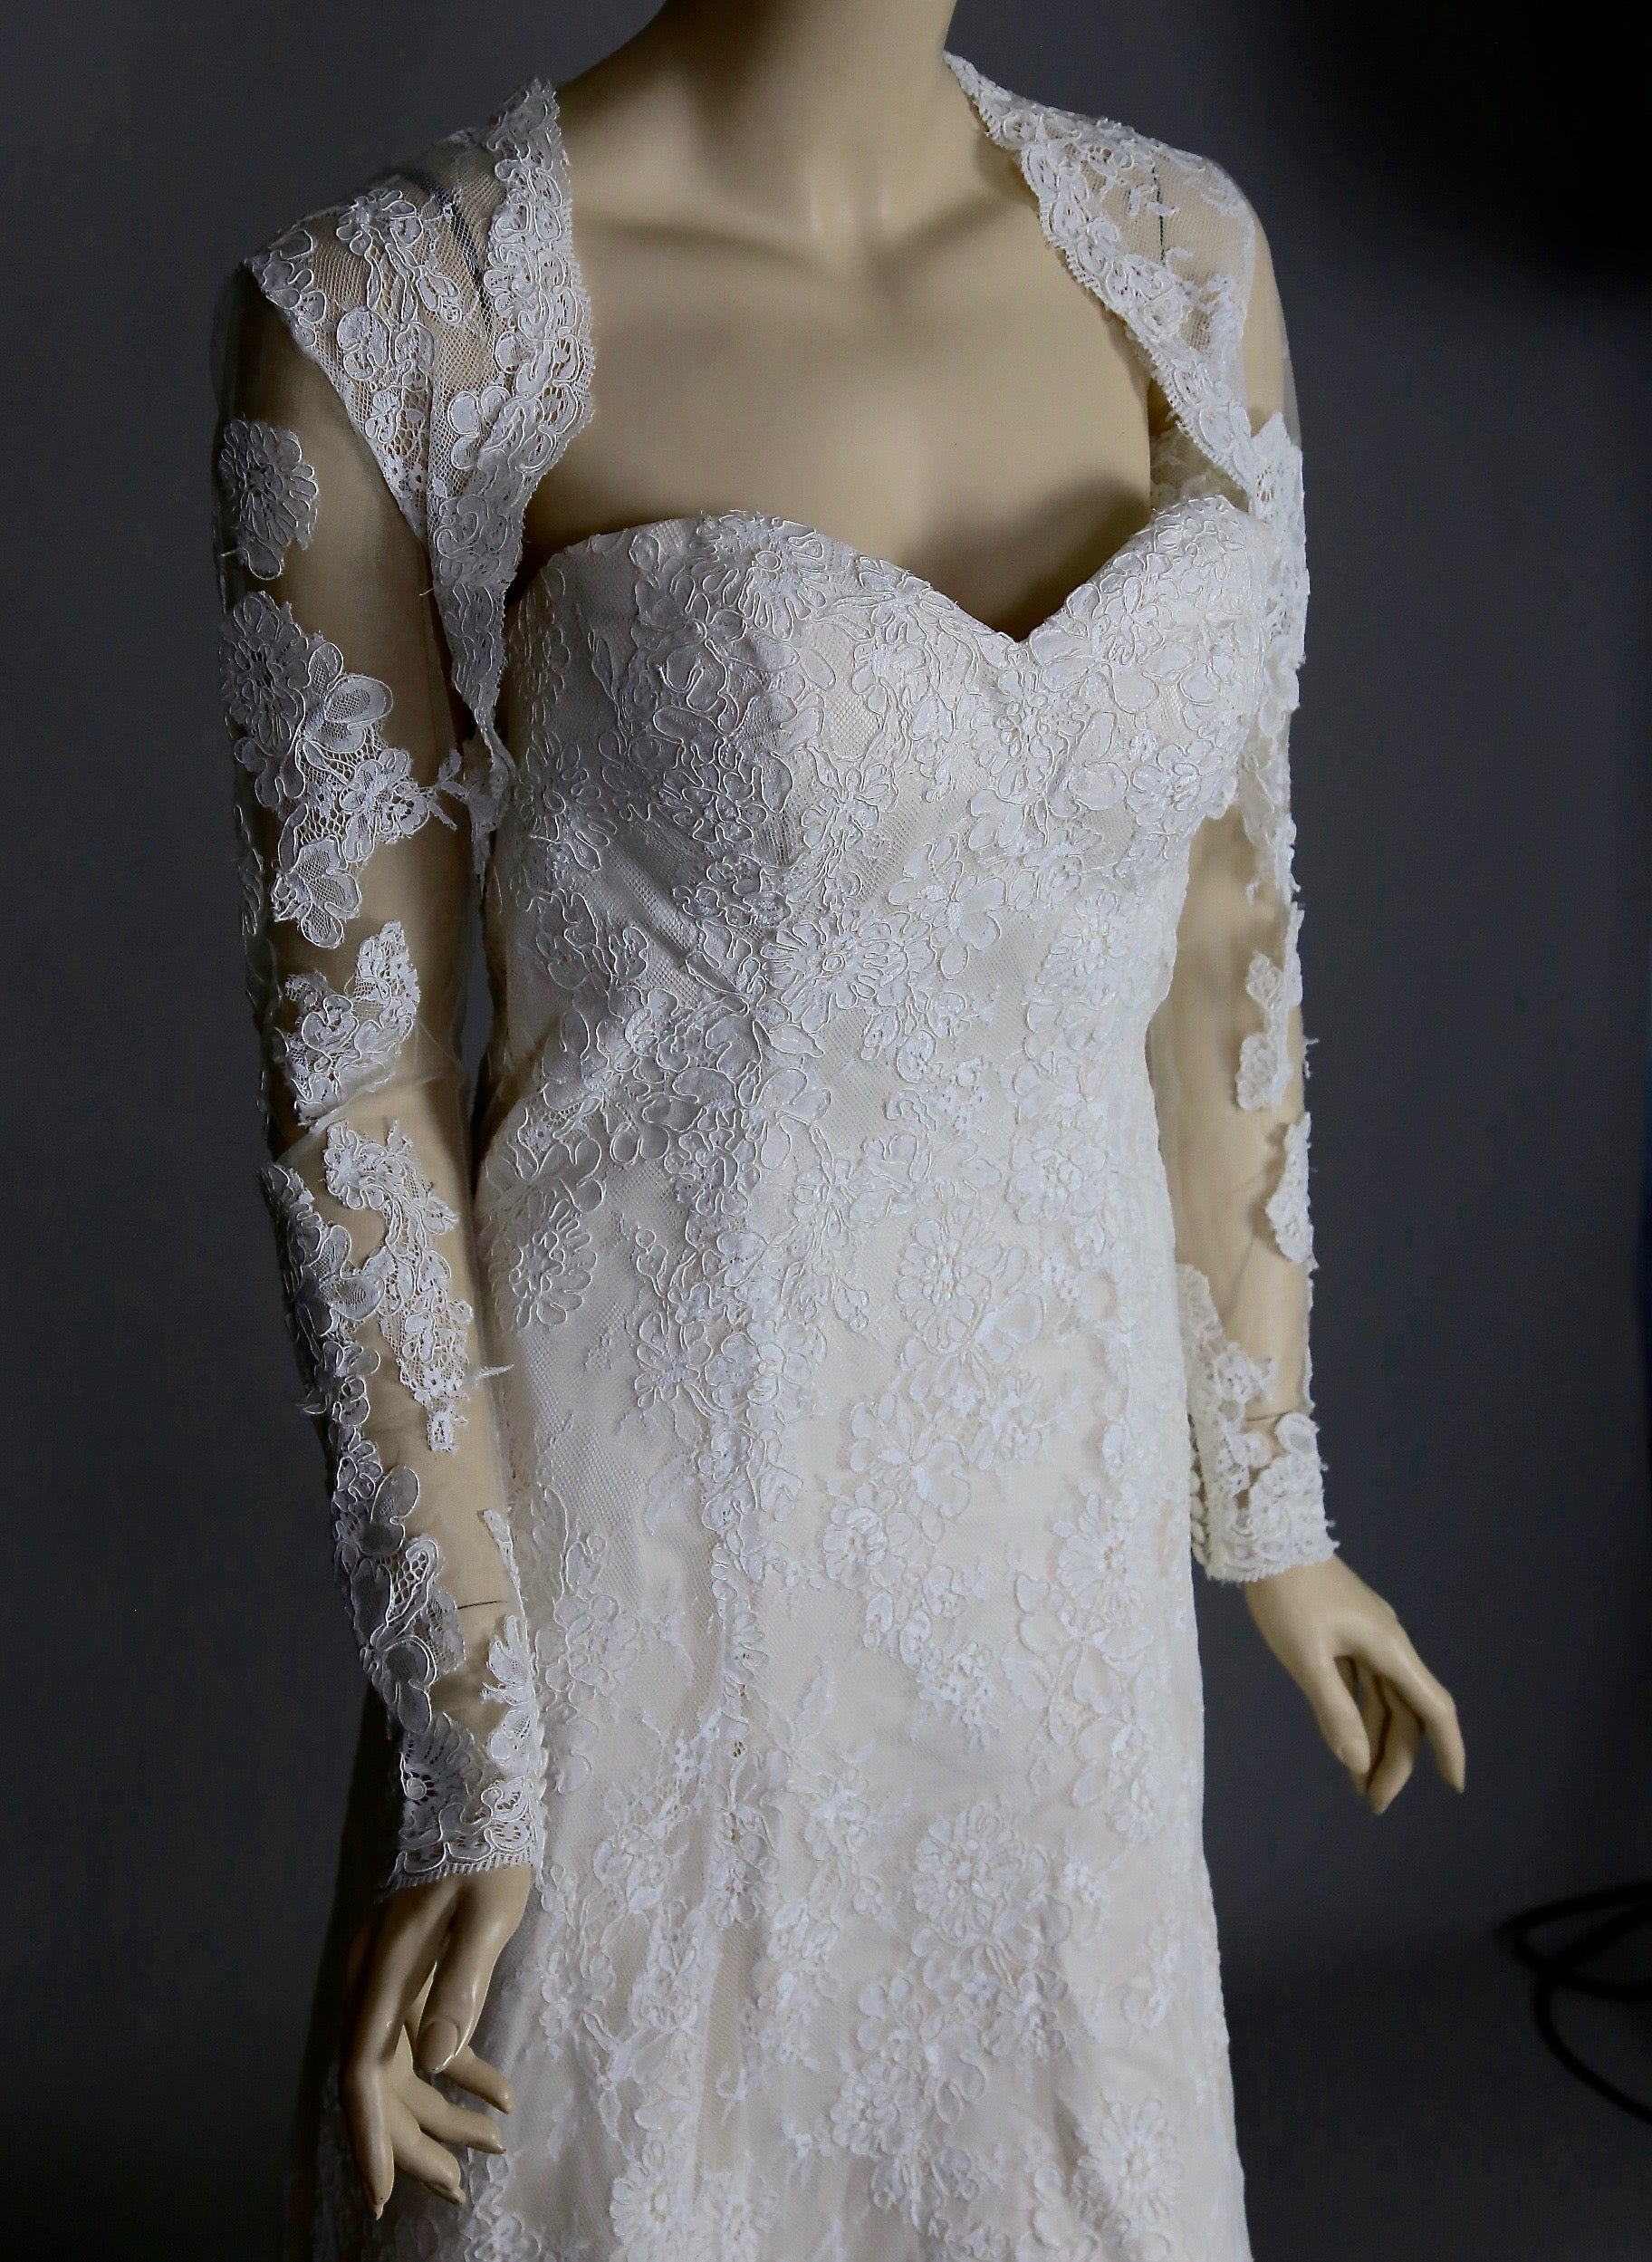 Justin Alexander wedding dress strapless bridal gown with lace jacket